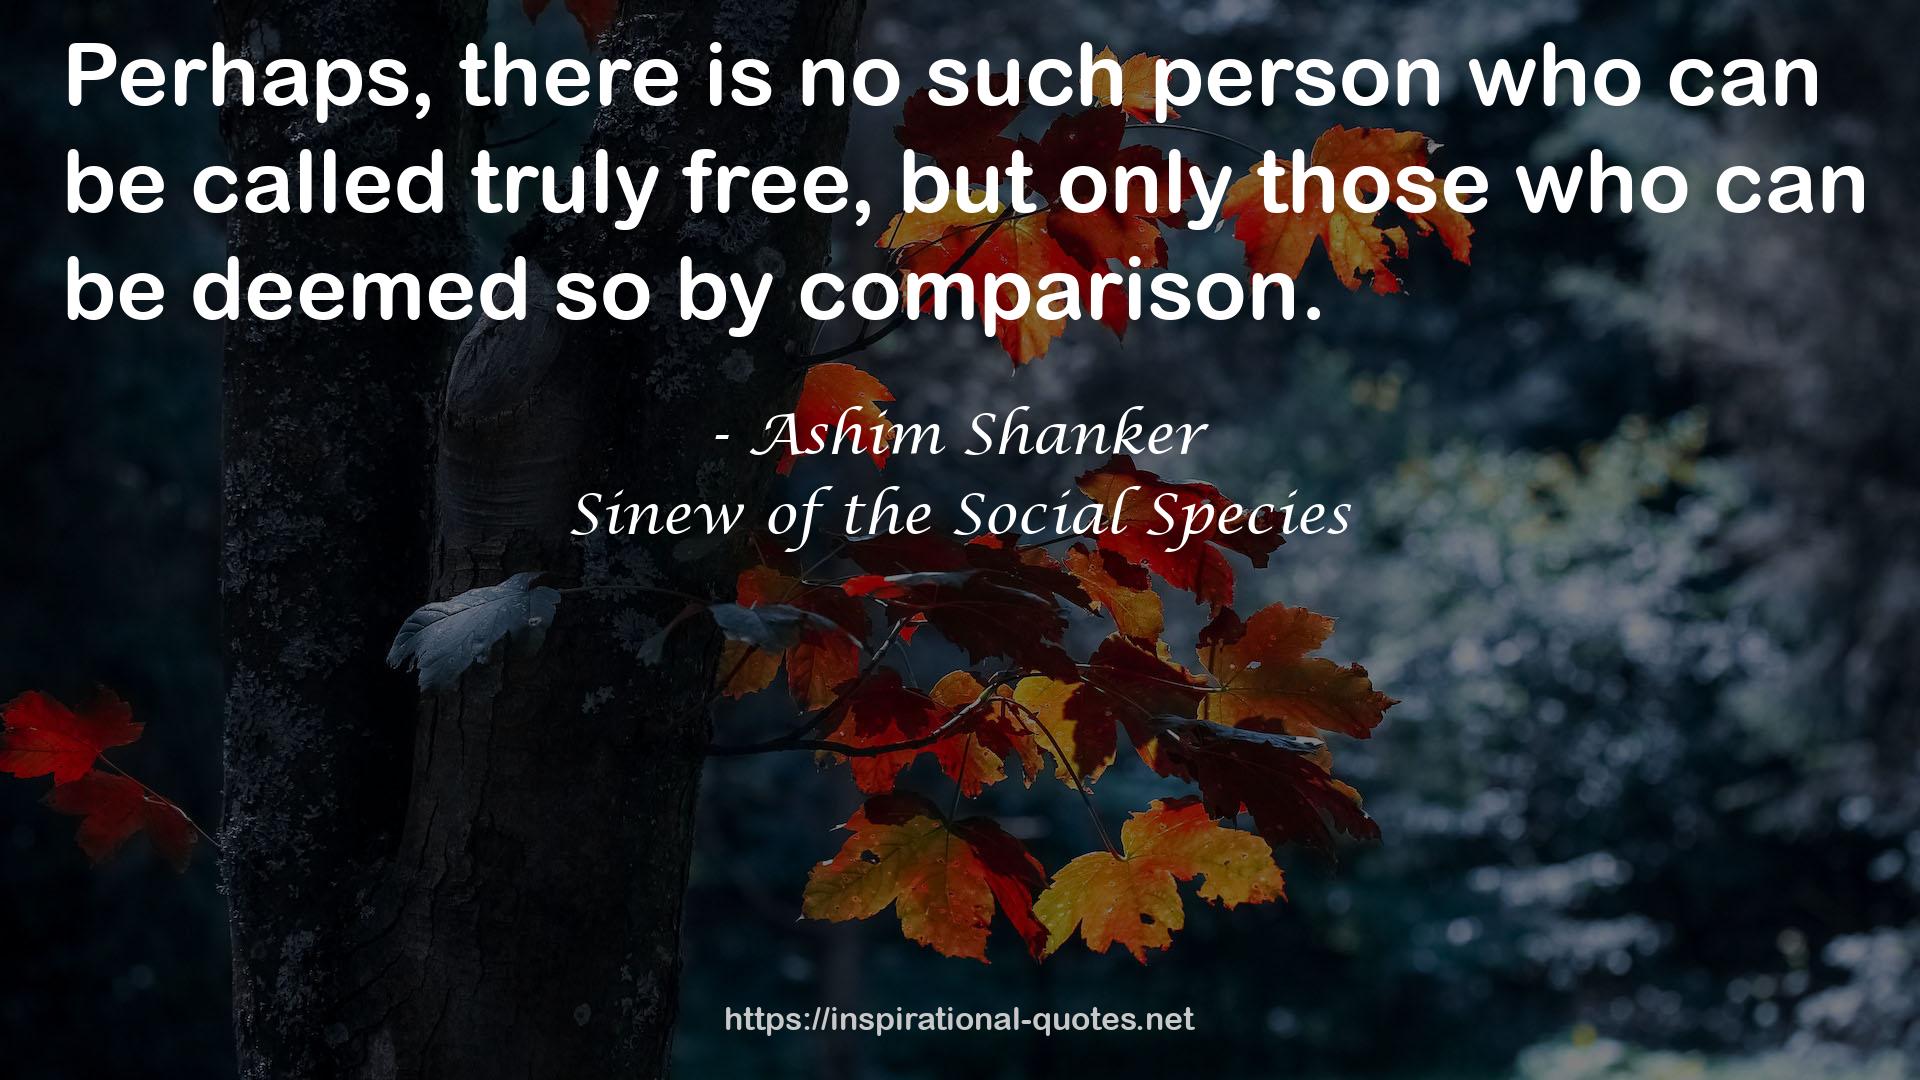 Sinew of the Social Species QUOTES